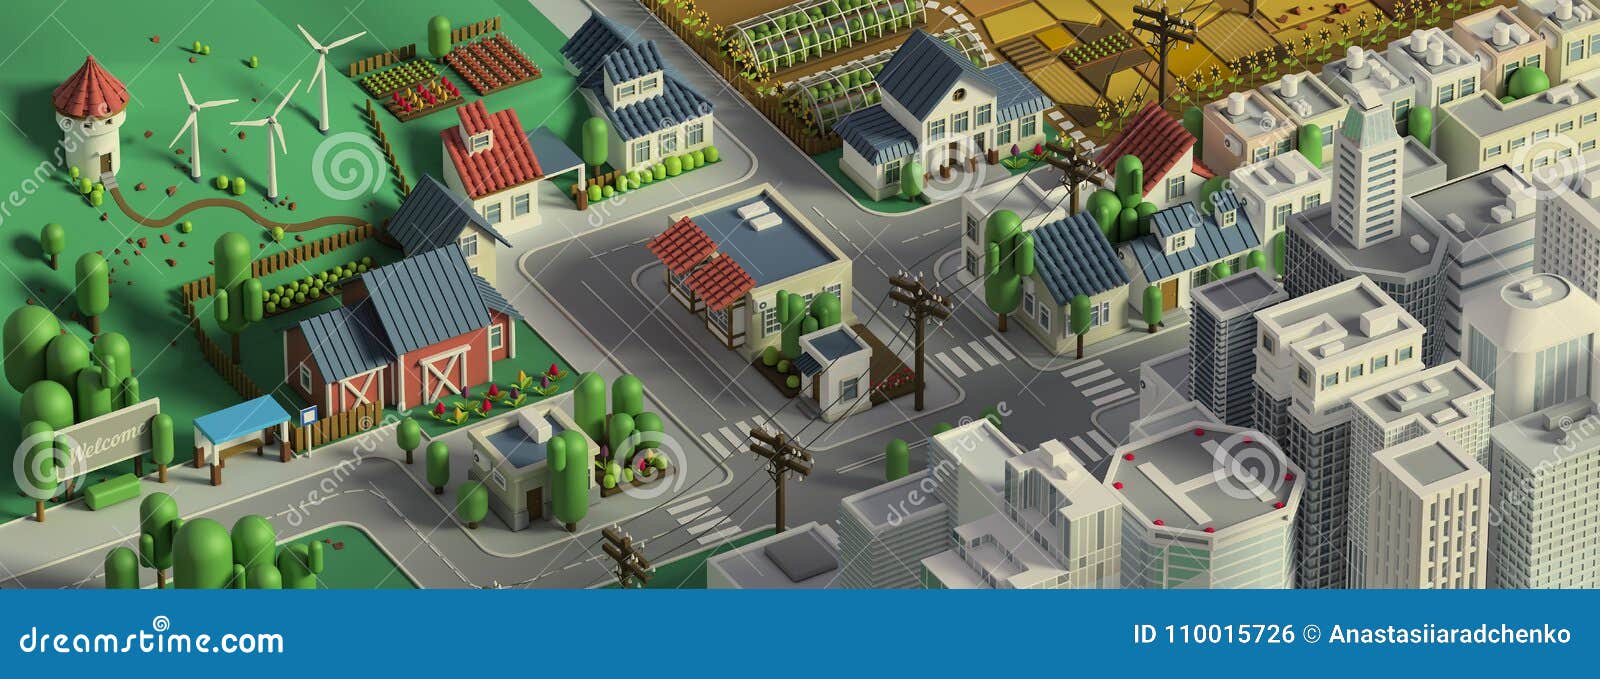 3d Rendering Of Low Poly Isometric City Cartoon Landscape Stock